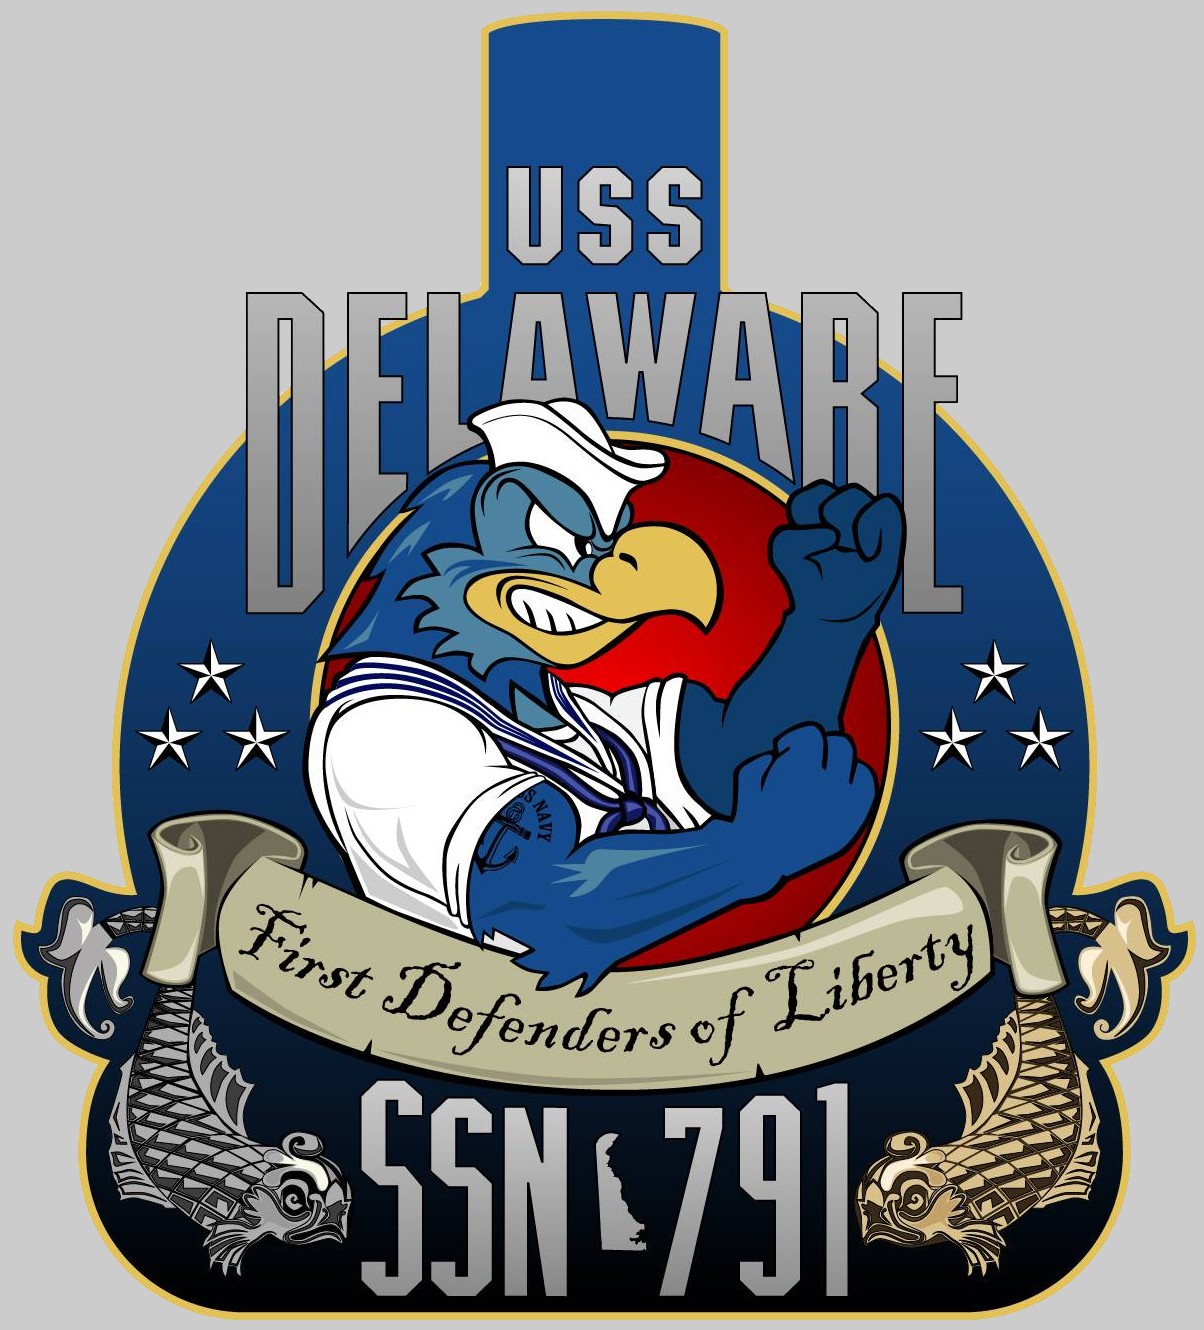 ssn-791 uss delaware insignia crest patch badge virginia class attack submarine us navy 02x